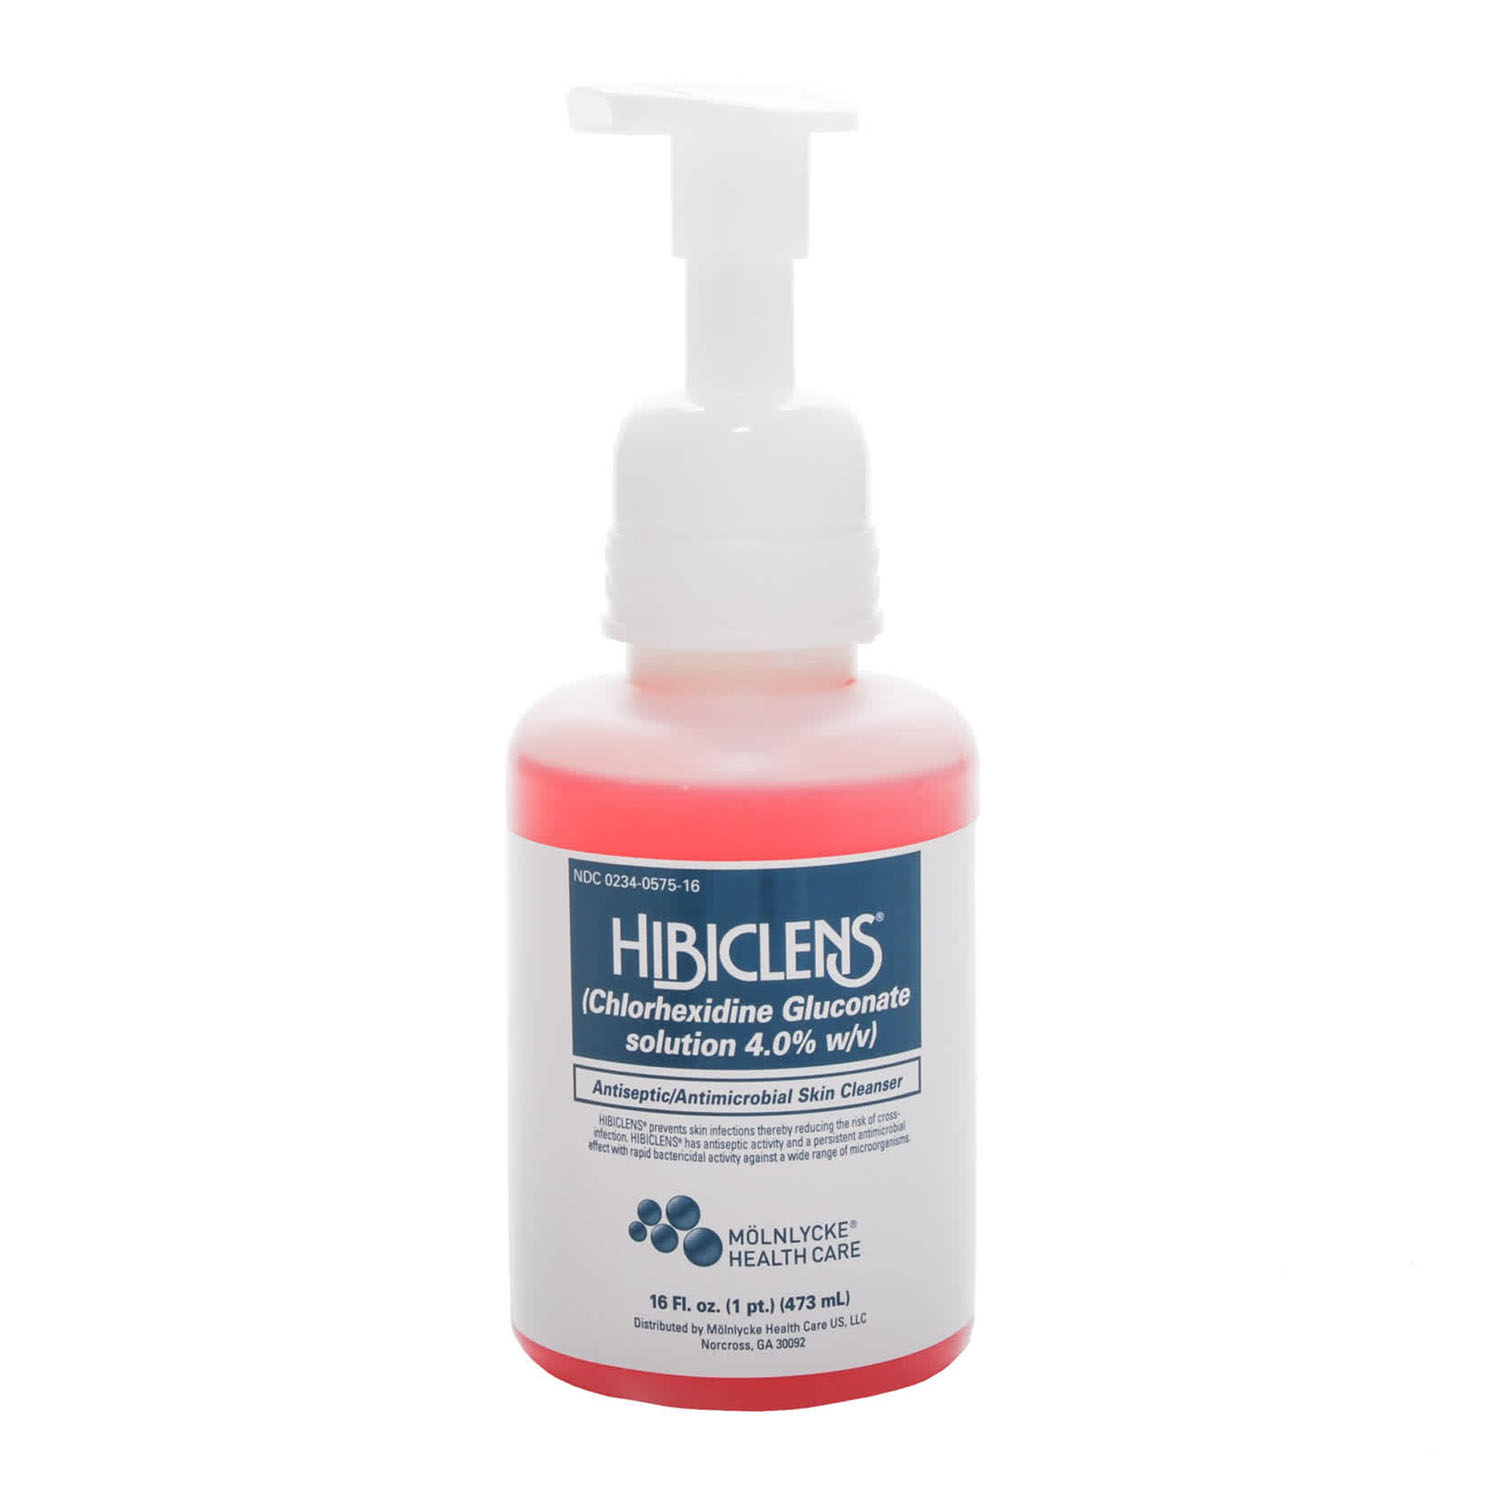 MOLNLYCKE HIBICLENS® ANTISEPTIC ANTIMICROBIAL SKIN CLEANSER : 57516 EA